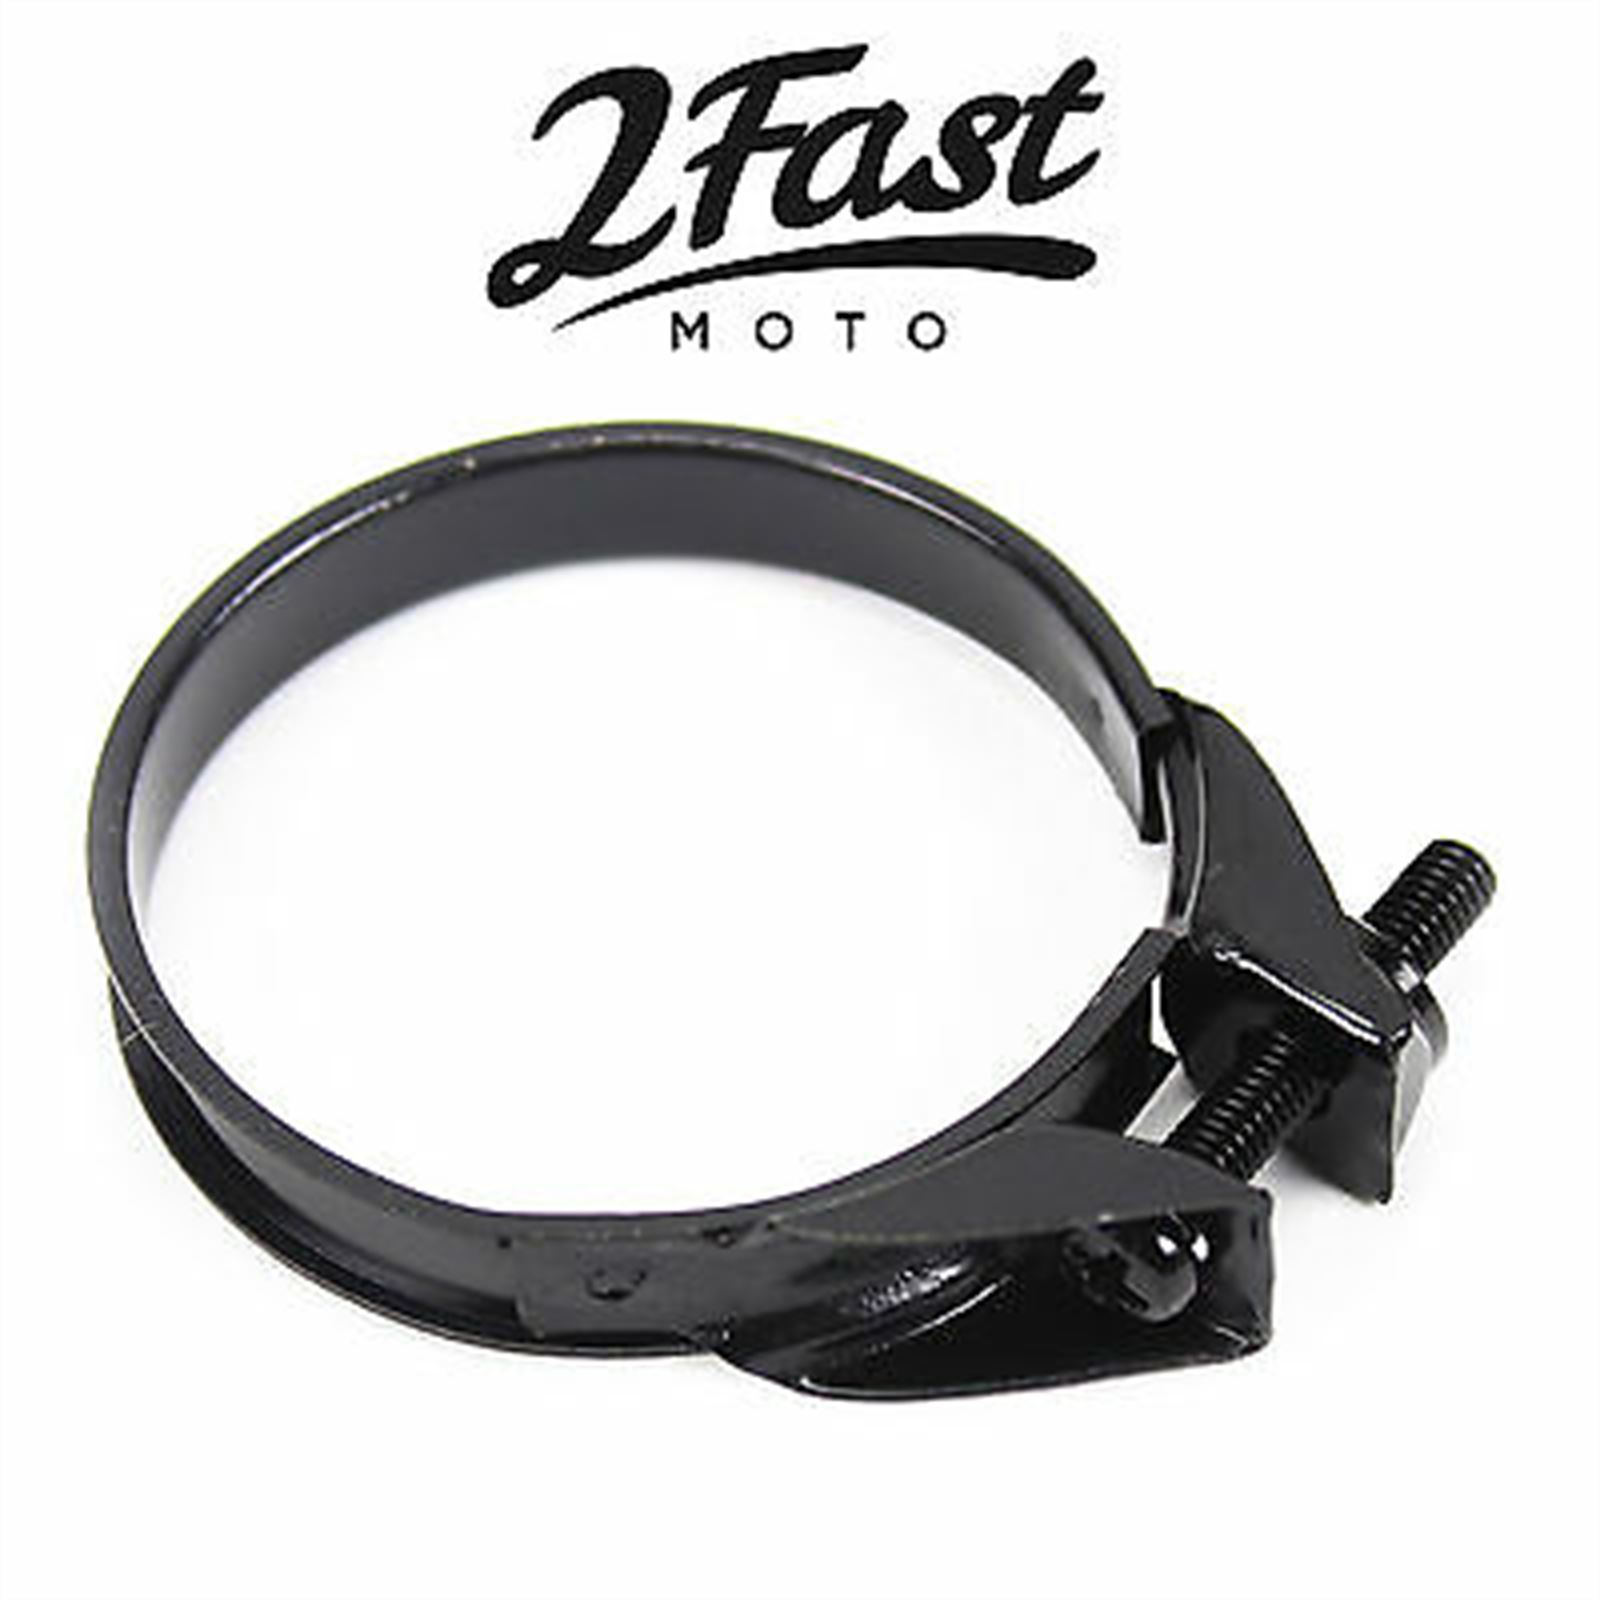 2FastMoto Carb Intake Air Box Filter Band Clamp Motorcycle Triumph 90"s 